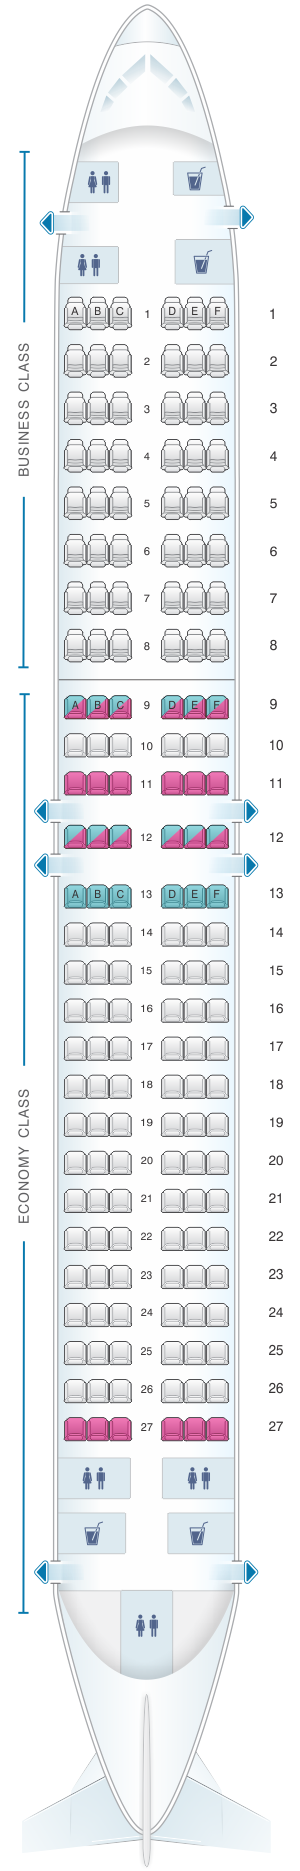 Seat map for Air Algerie Boeing B737-800 config 1